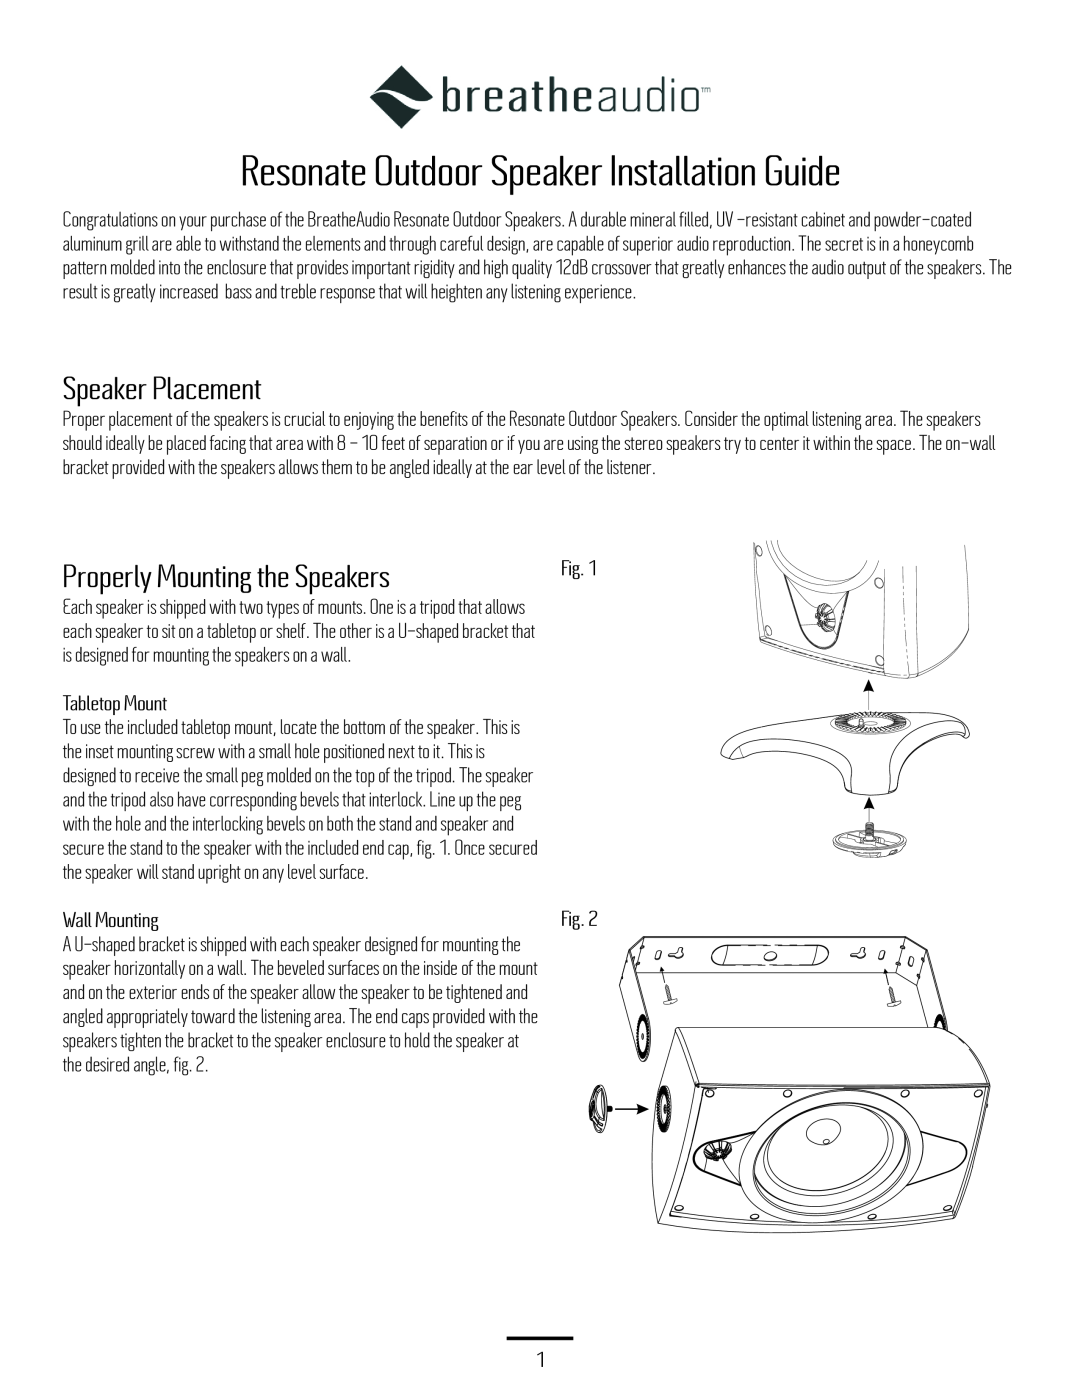 BreatheAudio BA-650-OW manual Speaker Placement, Properly Mounting the Speakers, Tabletop Mount, Wall Mounting, Fig. Fig 